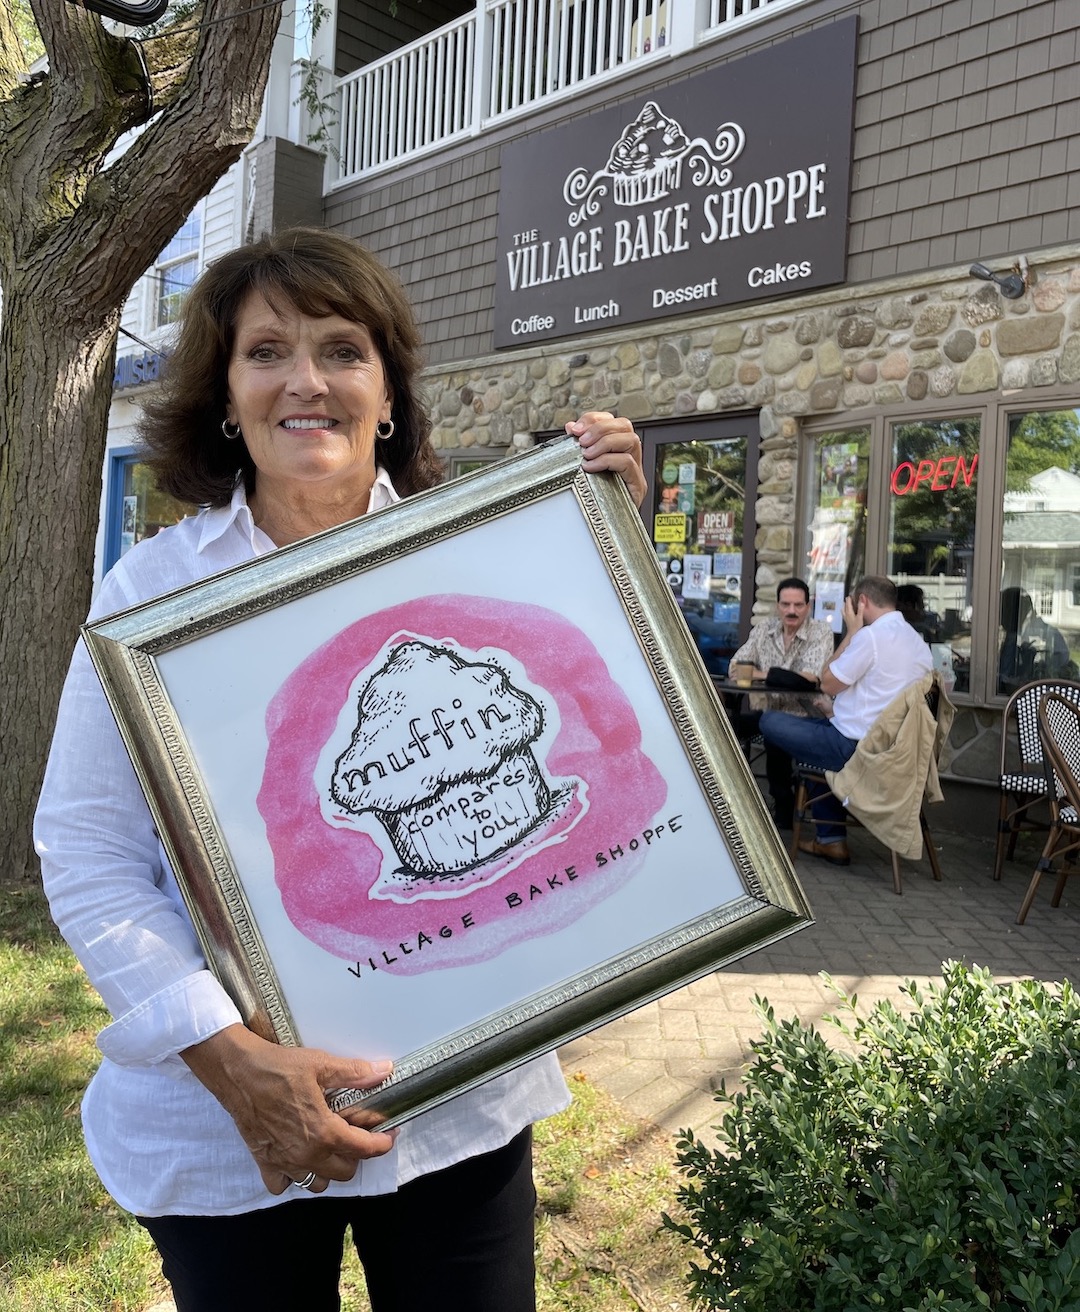 Maureen Kellick stands in front of the Village Bake Shoppe with one of the original watercolor paintings she made for the Lewiston sweet shop.